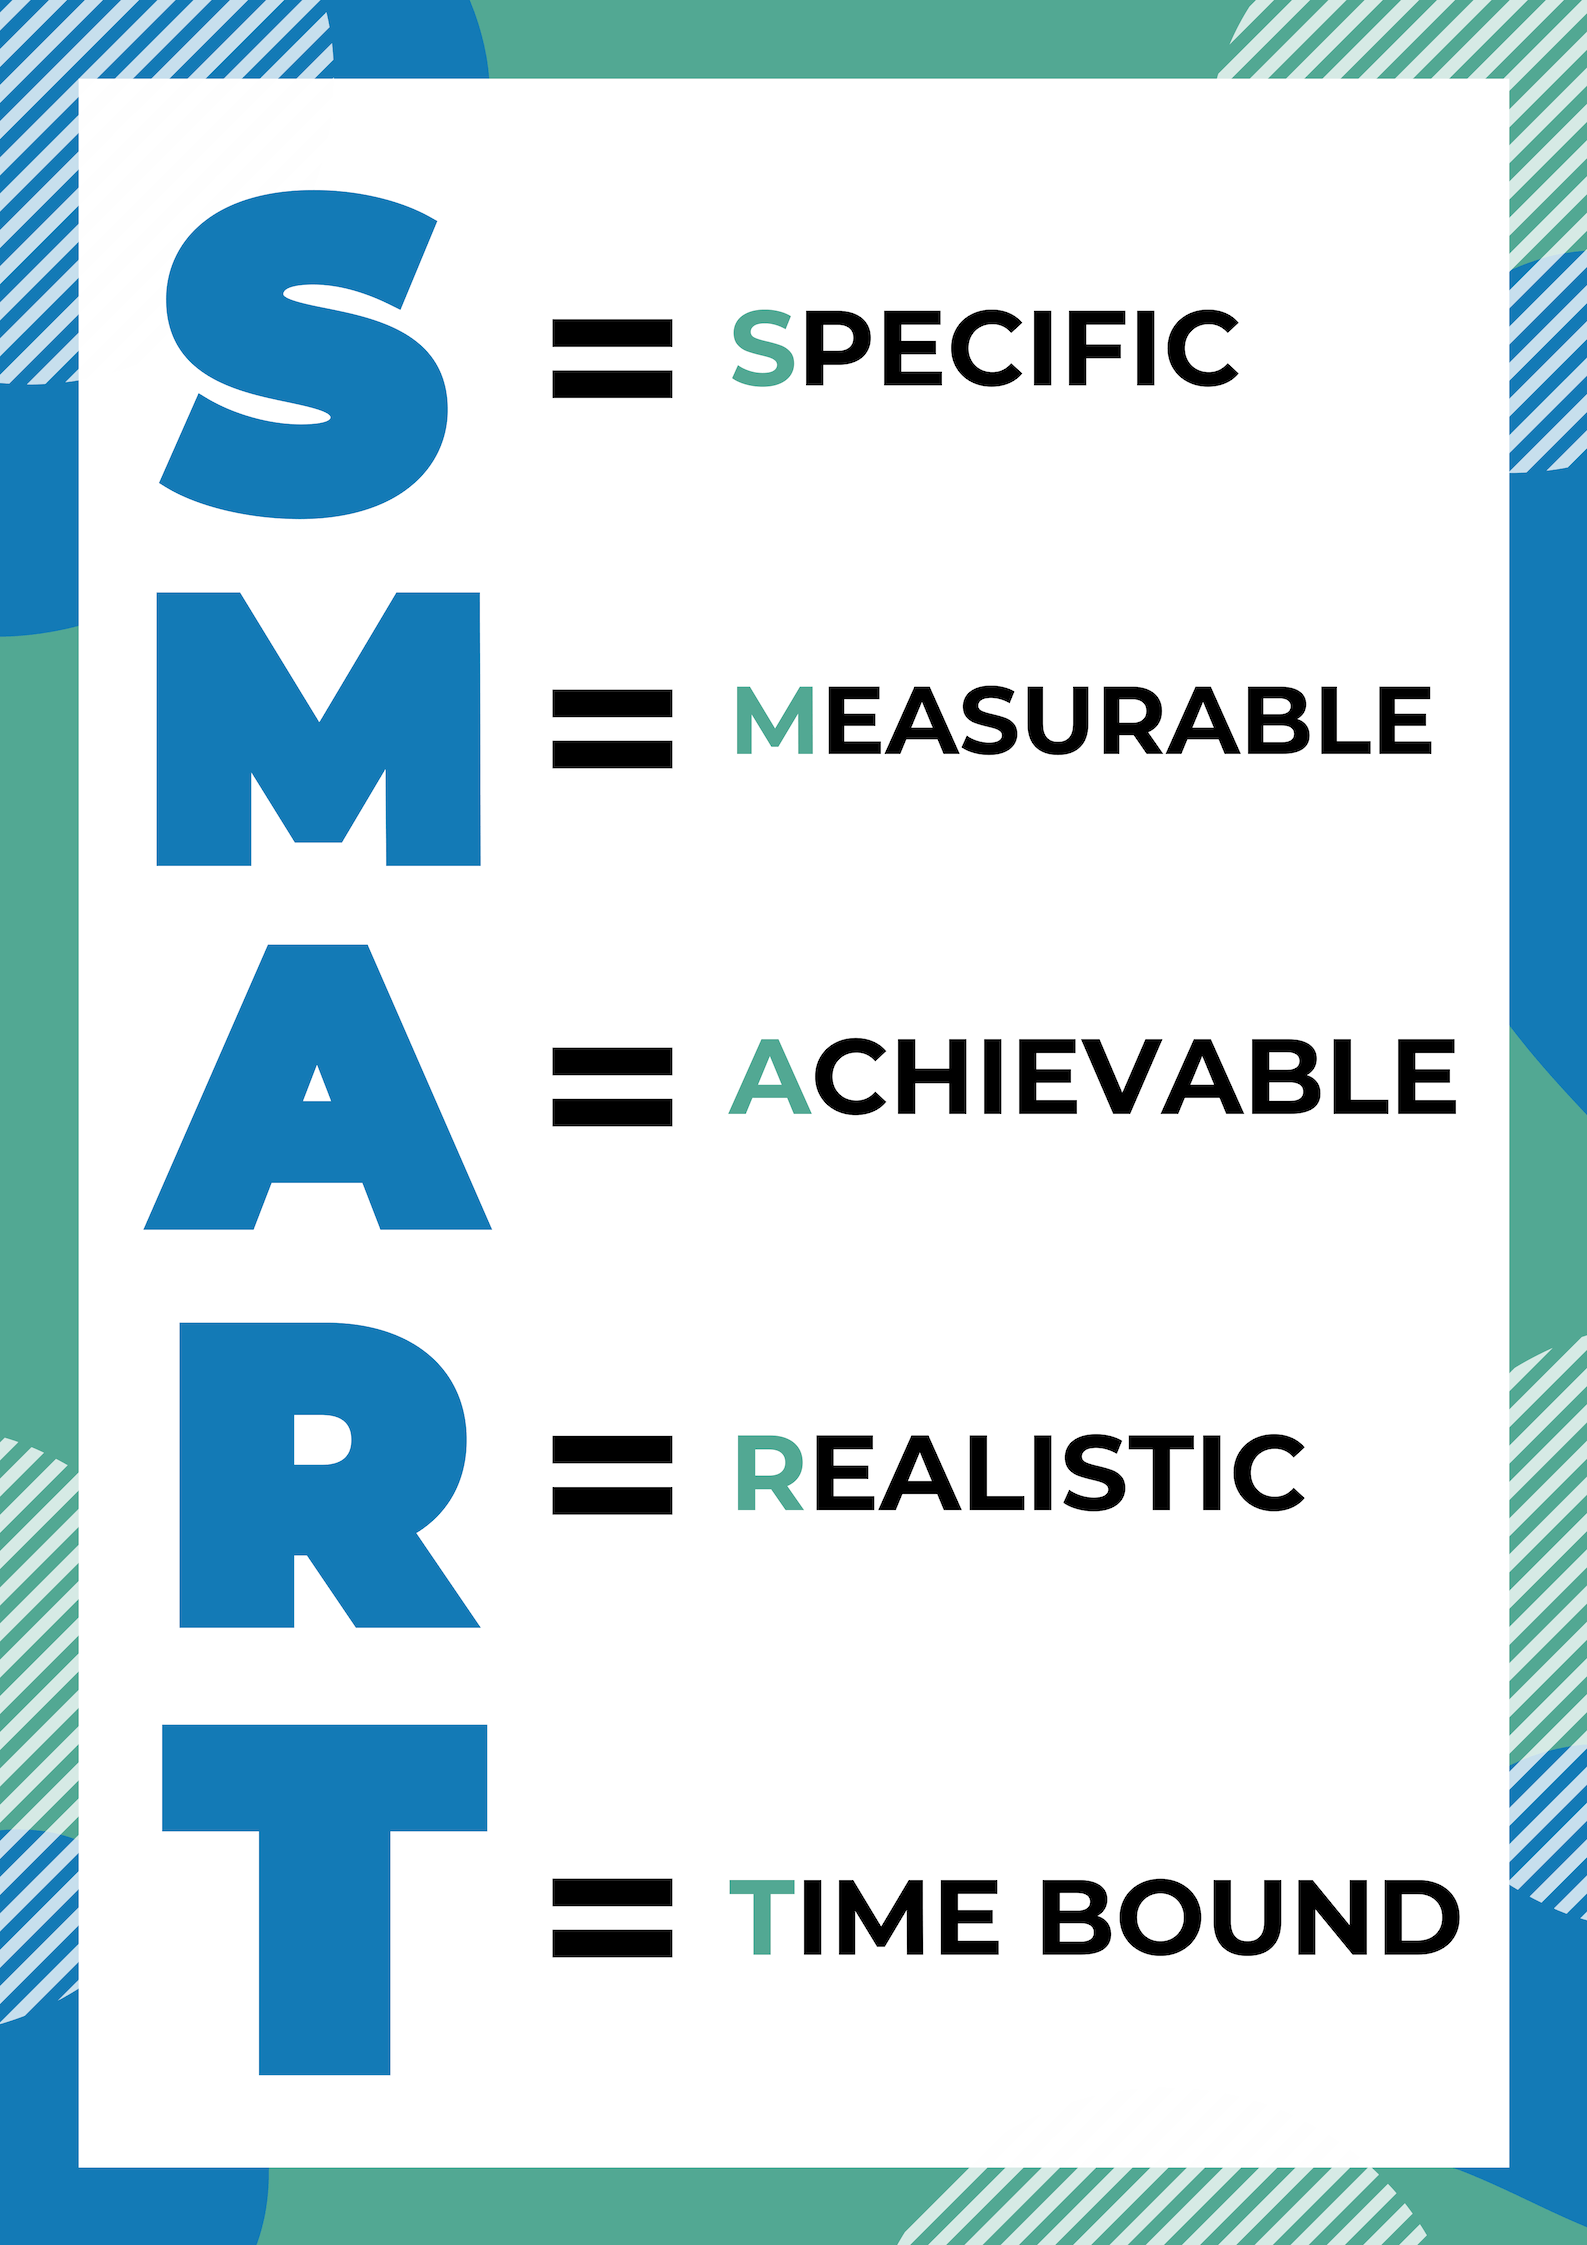 Smart acronym listed out. S = specific, M= measurable, A= achievable, R= realistic, T= time bound.